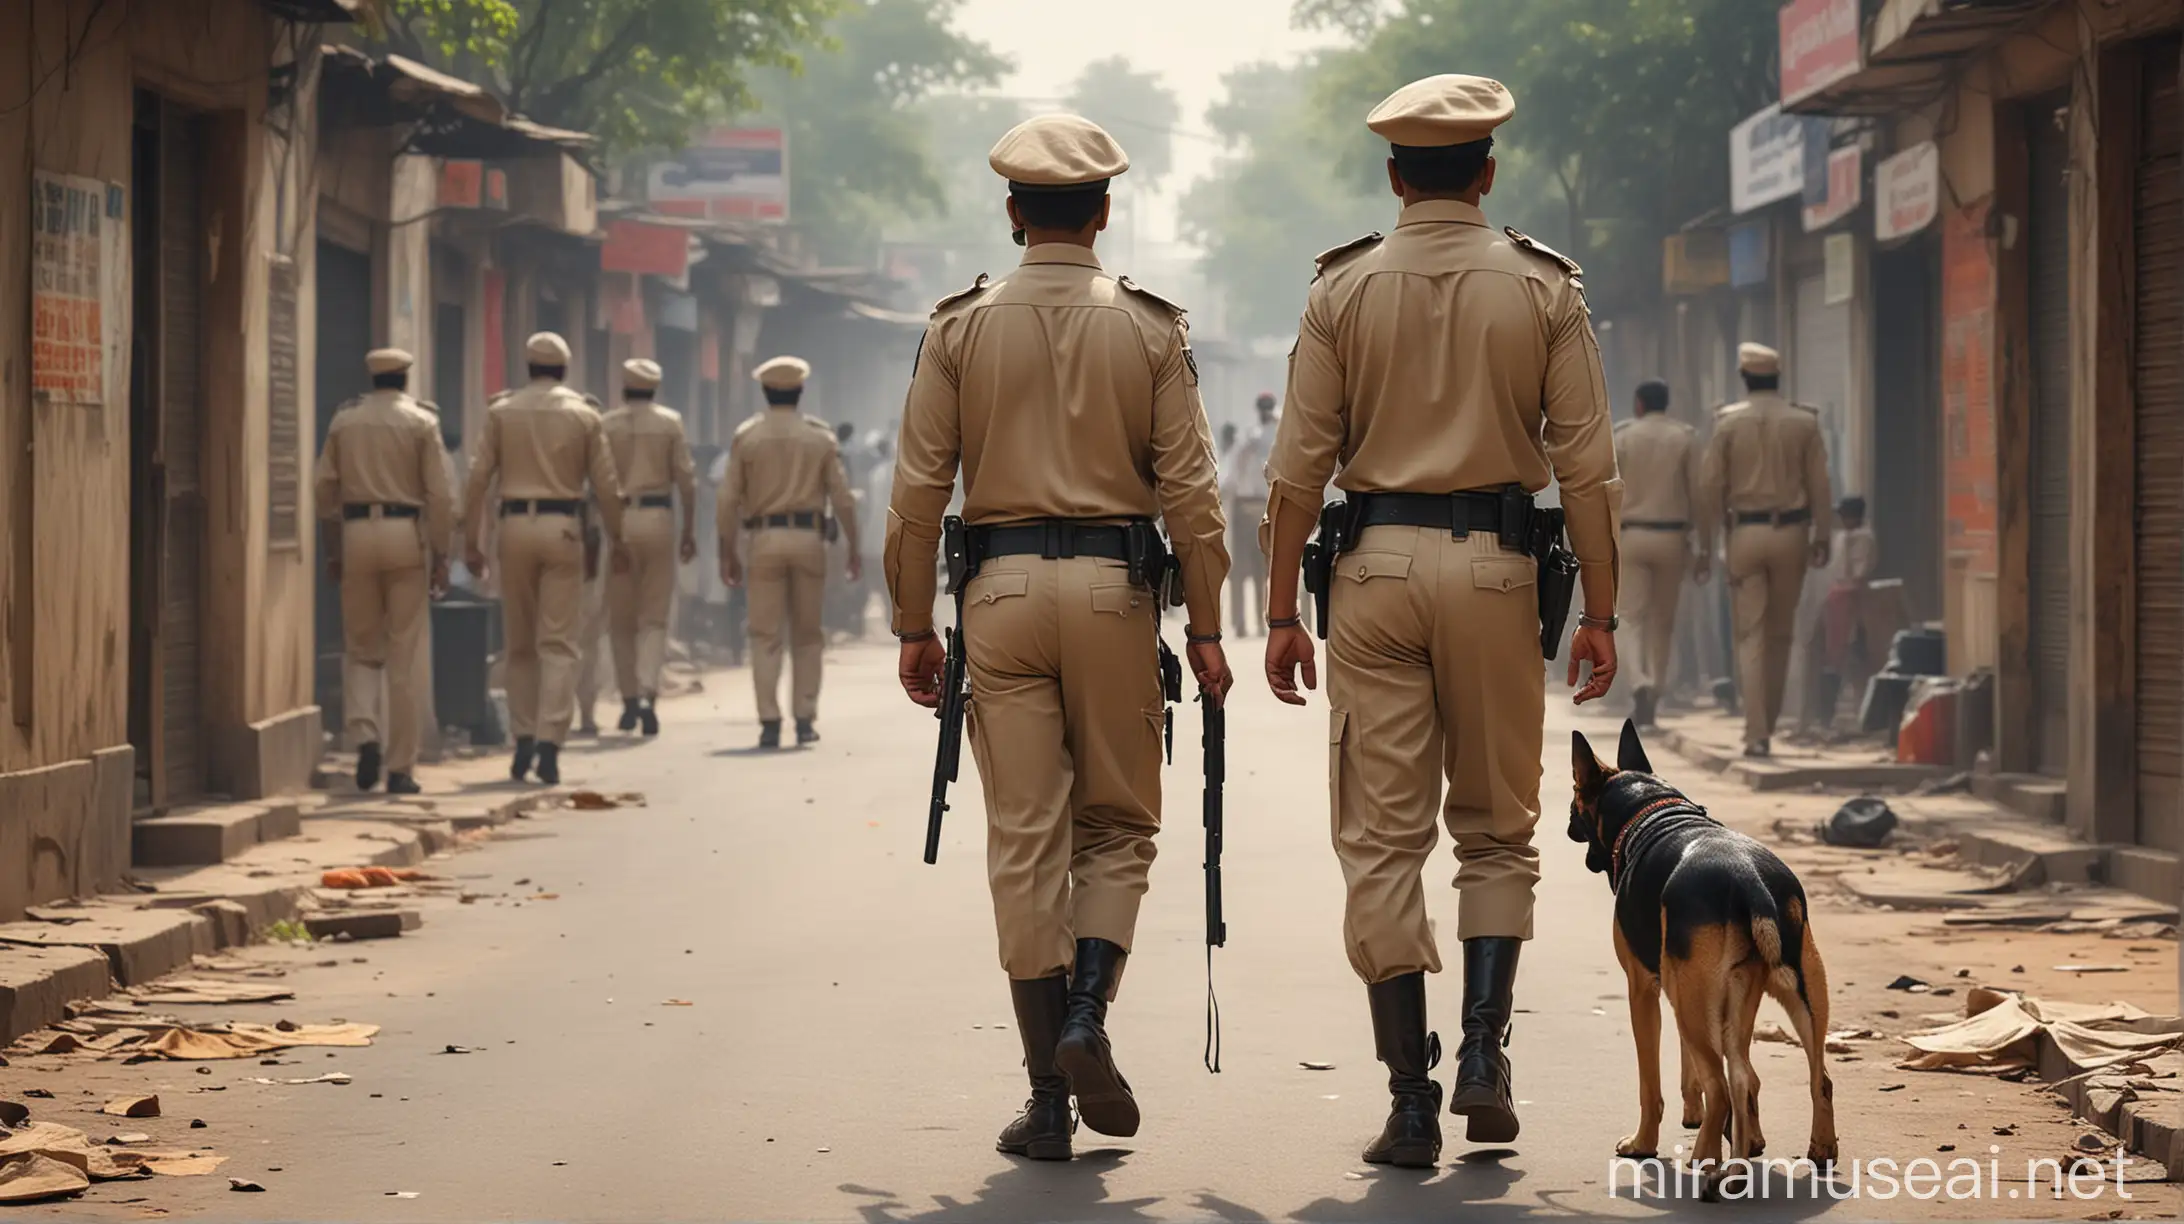 realistic ai image: indian police men wear khake dress, walking in street of delhi, shot from behind, Add a police dog in the scene

